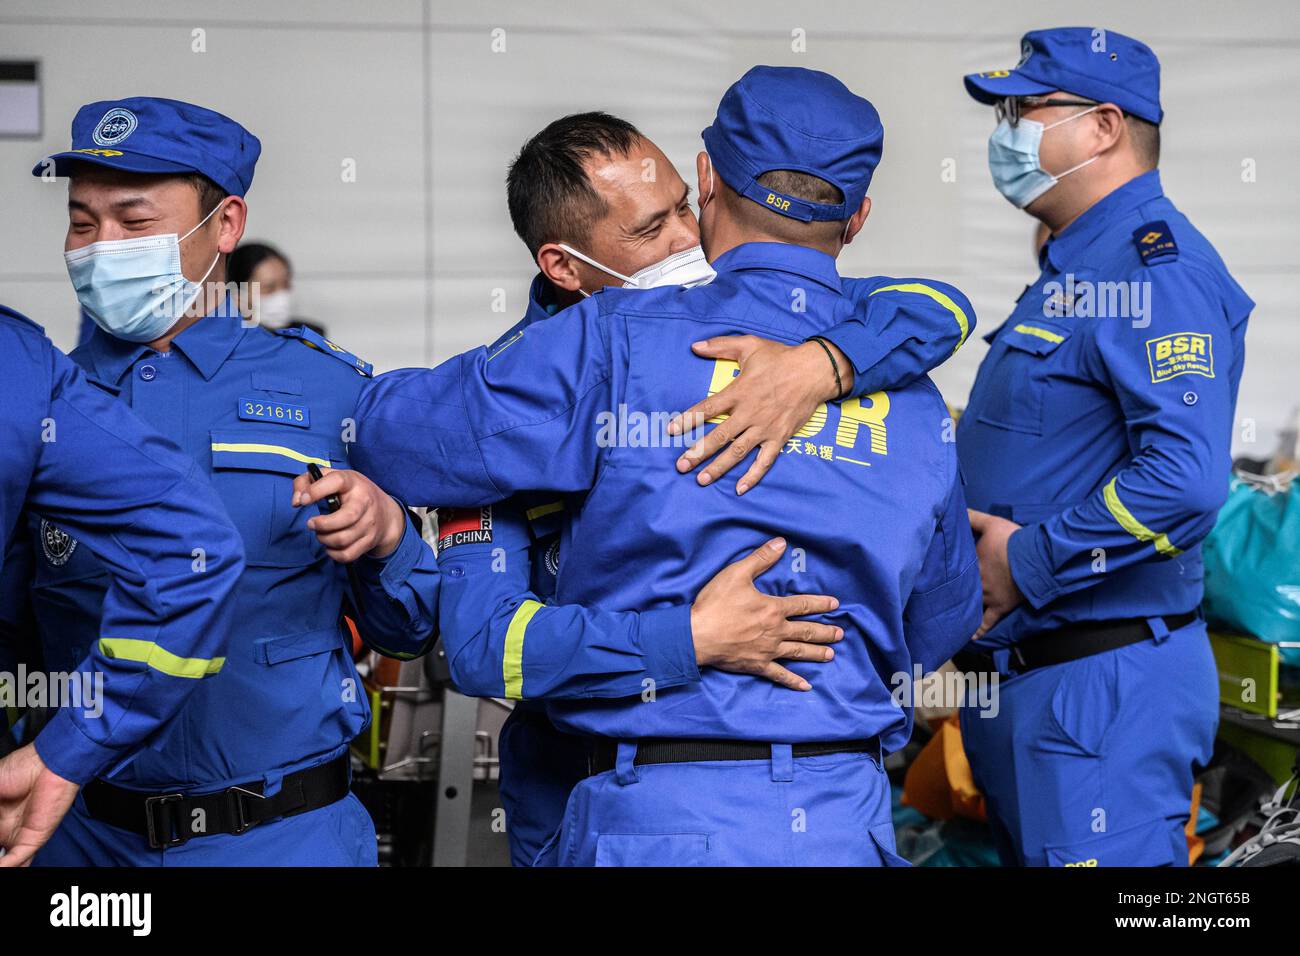 GUANGZHOU, CHINA - FEBRUARY 19, 2023 - Rescue workers embrace each other at Baiyun Airport in Guangzhou, Guangdong province, China, February 19, 2023. Stock Photo